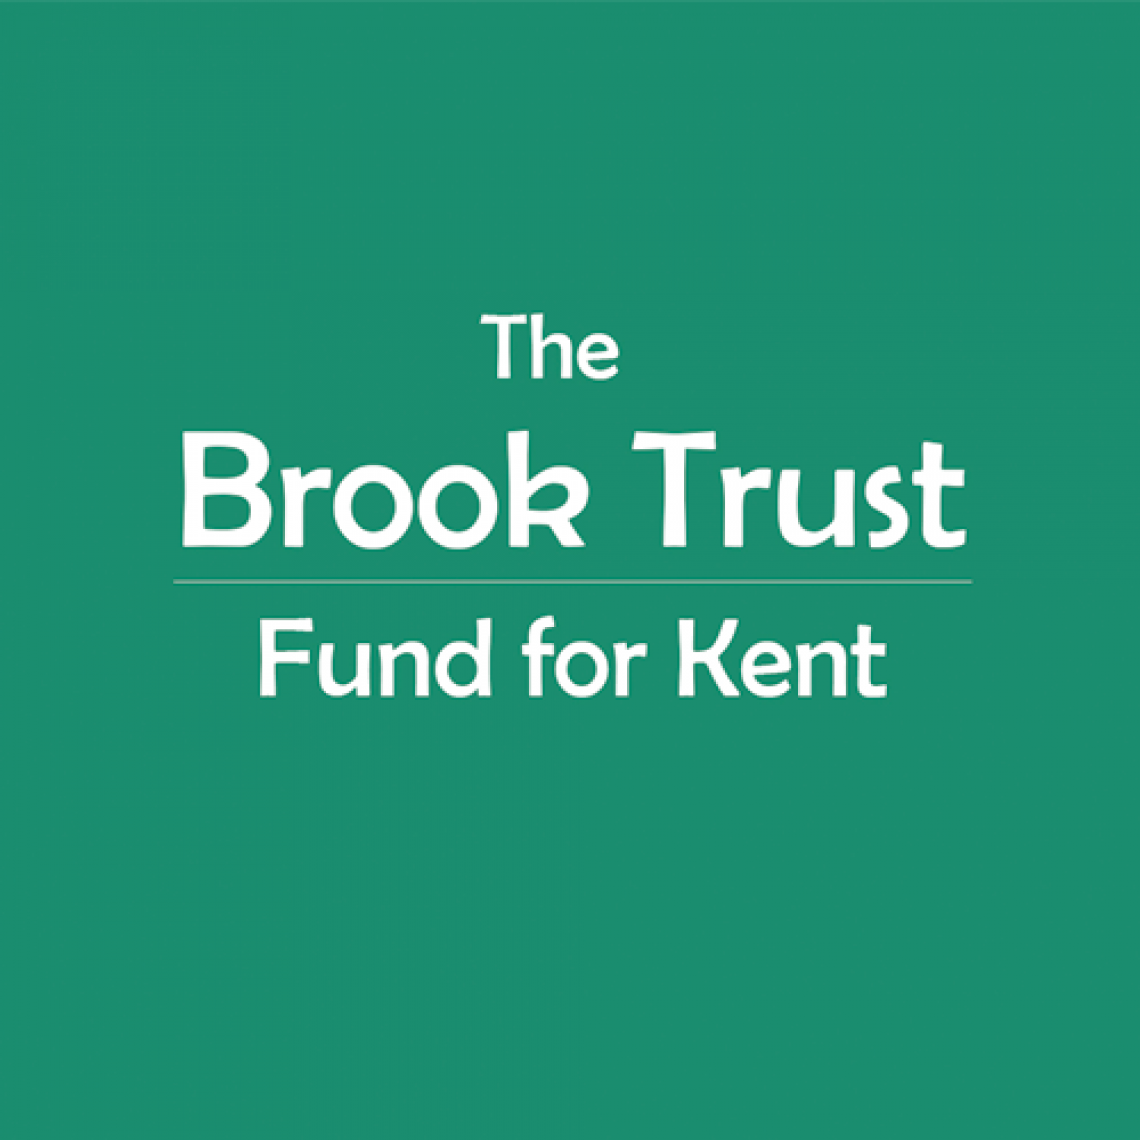 The Brook Trust Fund for Kent logo